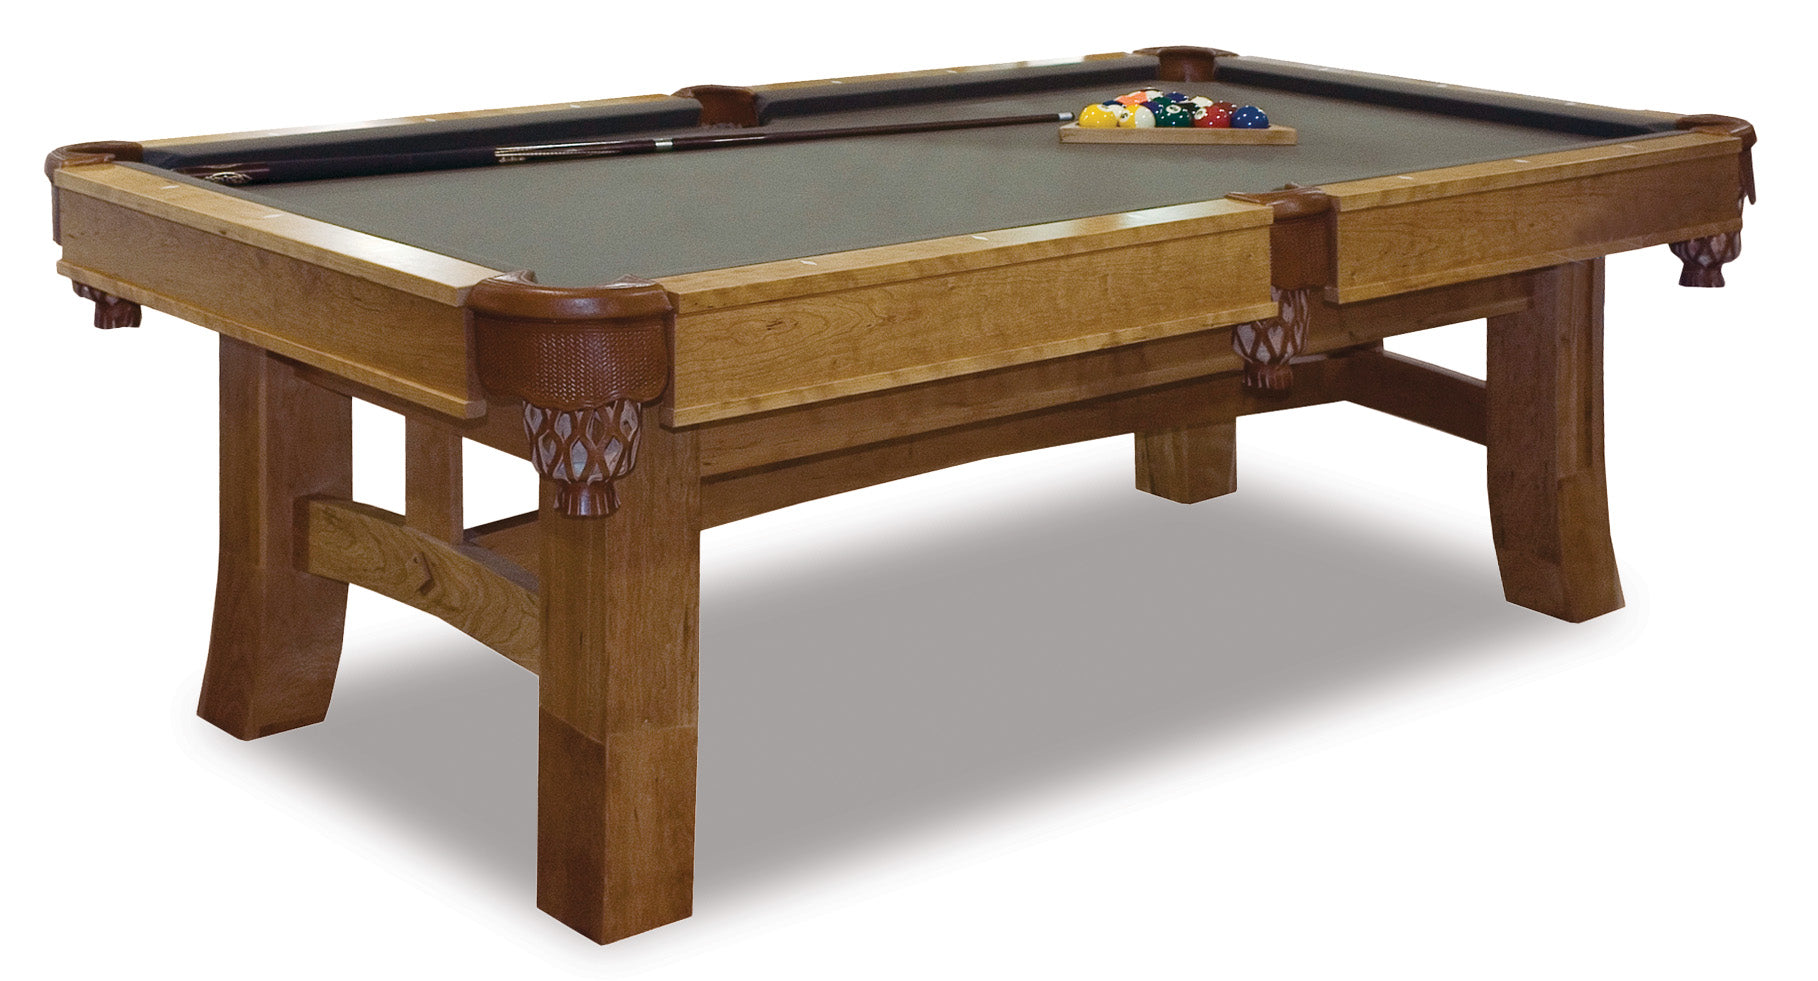 7' Hand-crafted Shaker Hill Pool Table (Brown Maple)